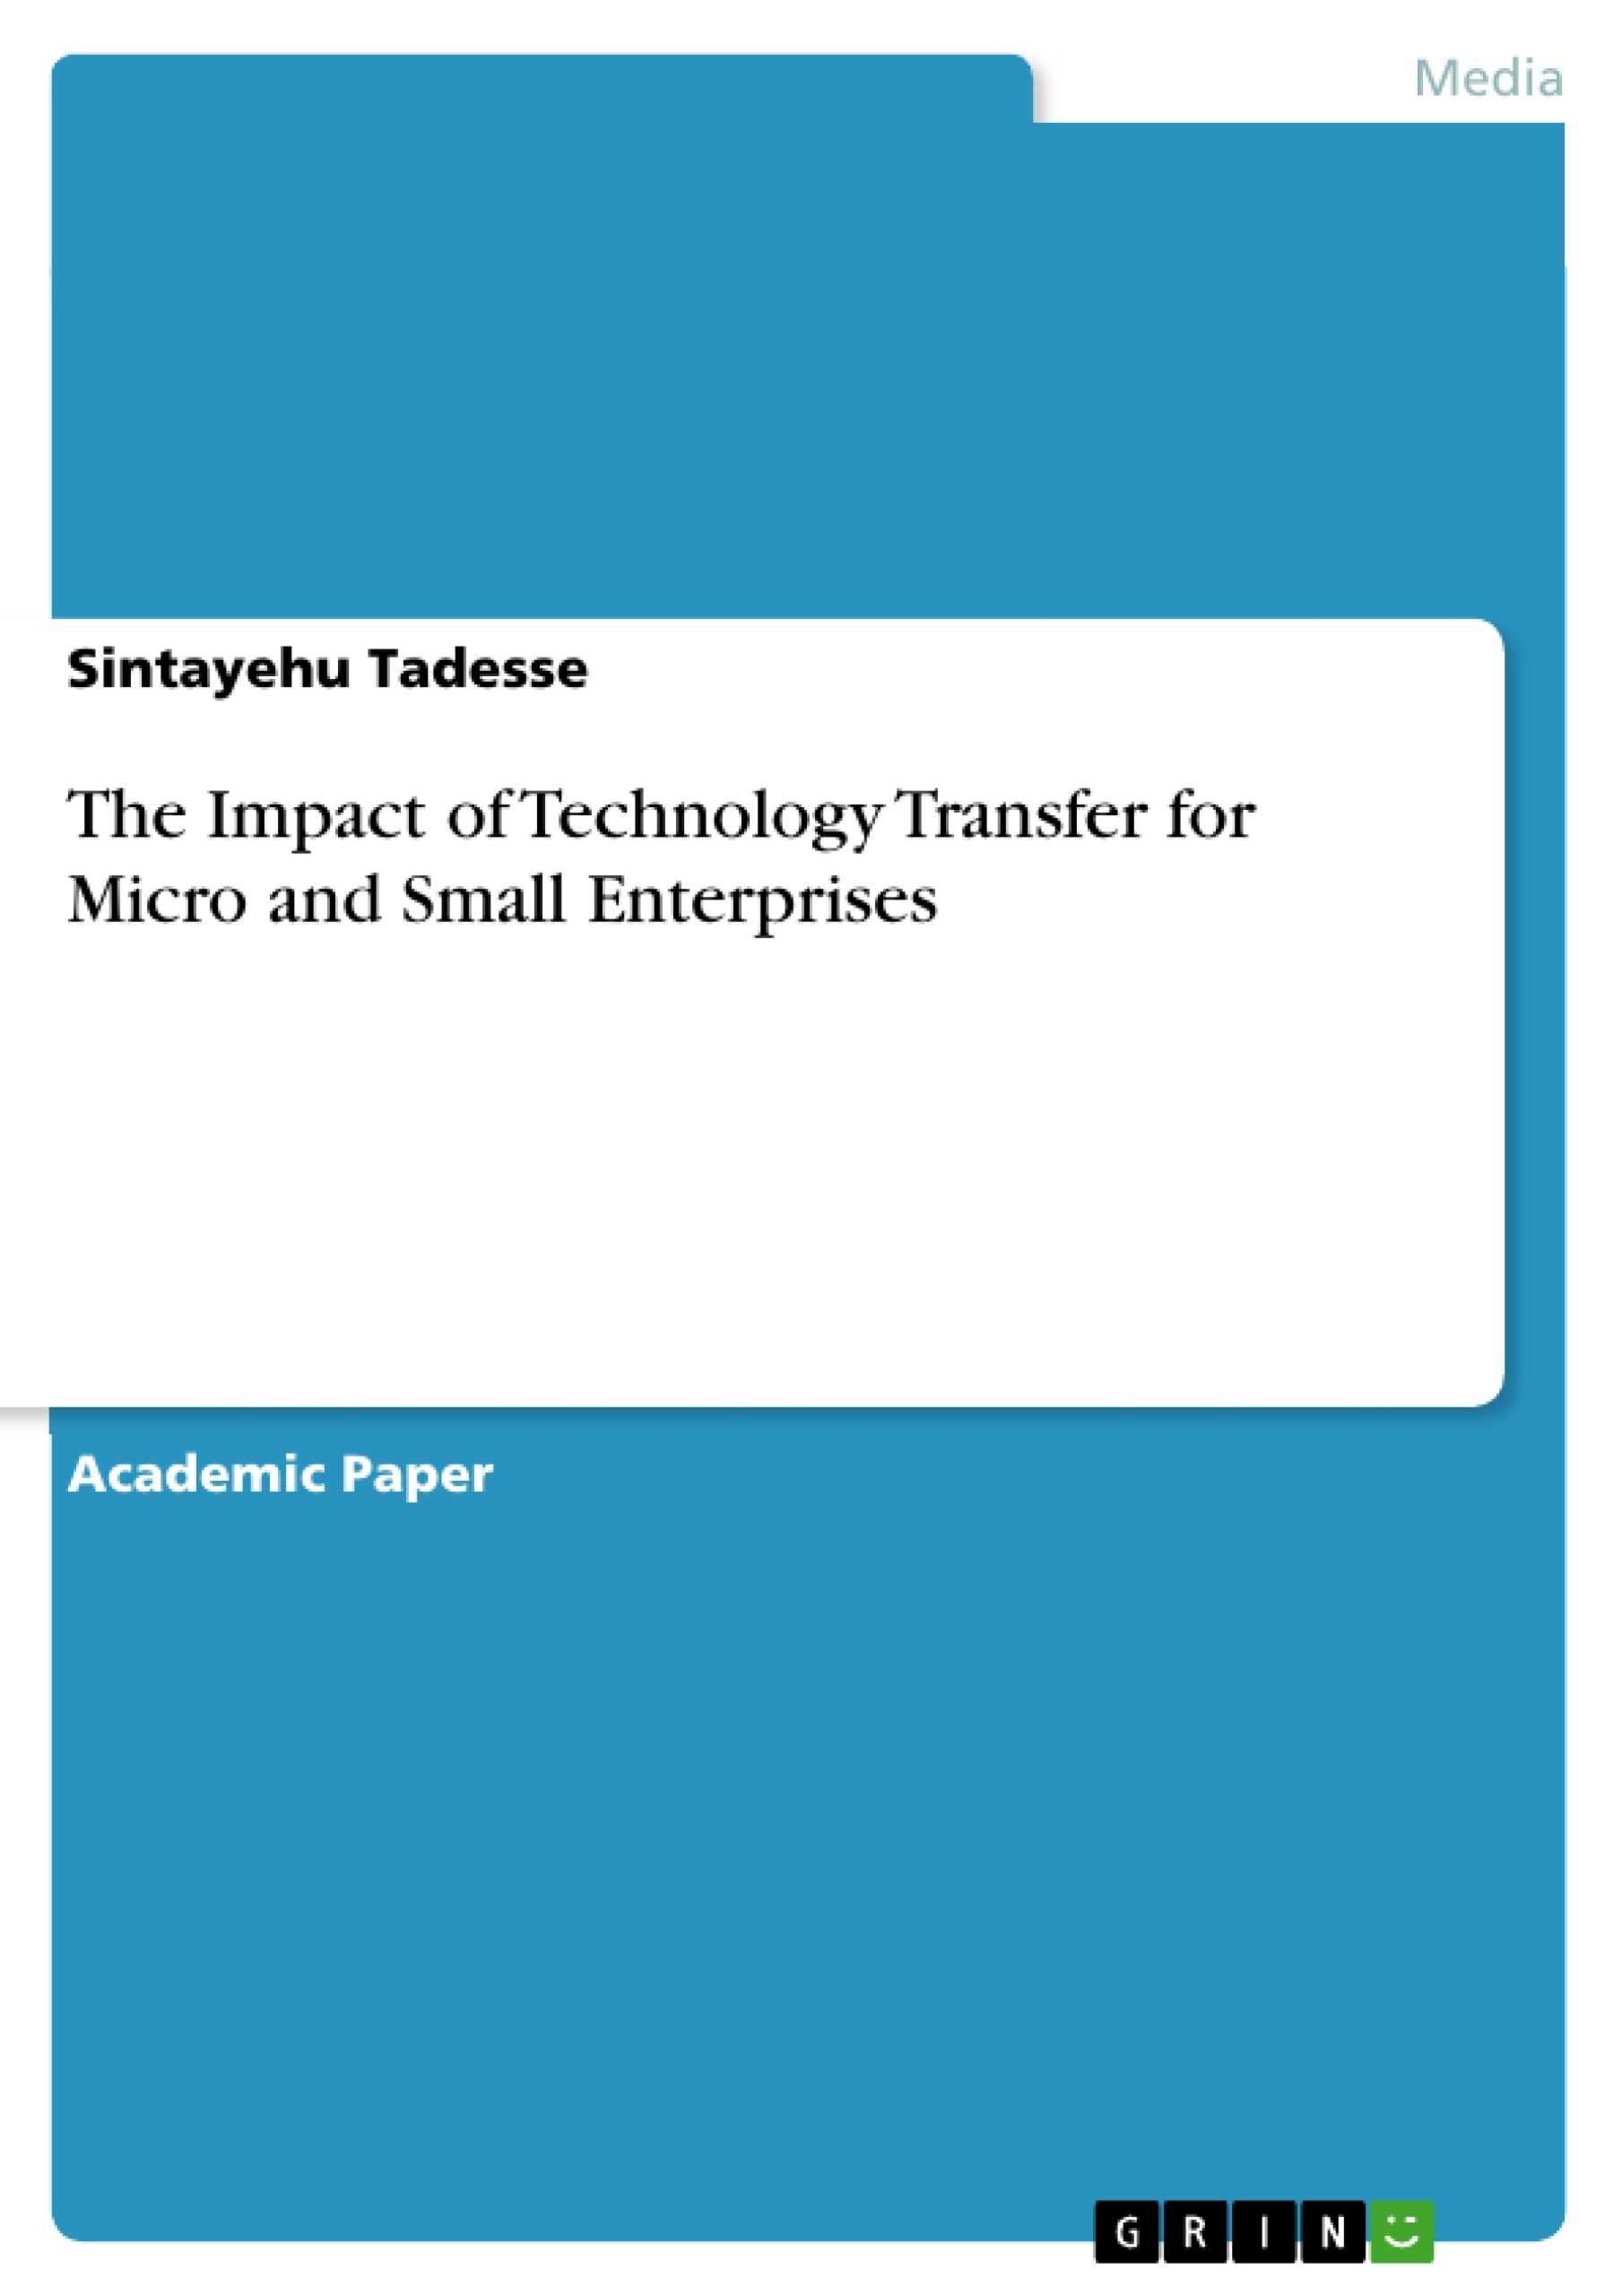 Title: The Impact of Technology Transfer for Micro and Small Enterprises